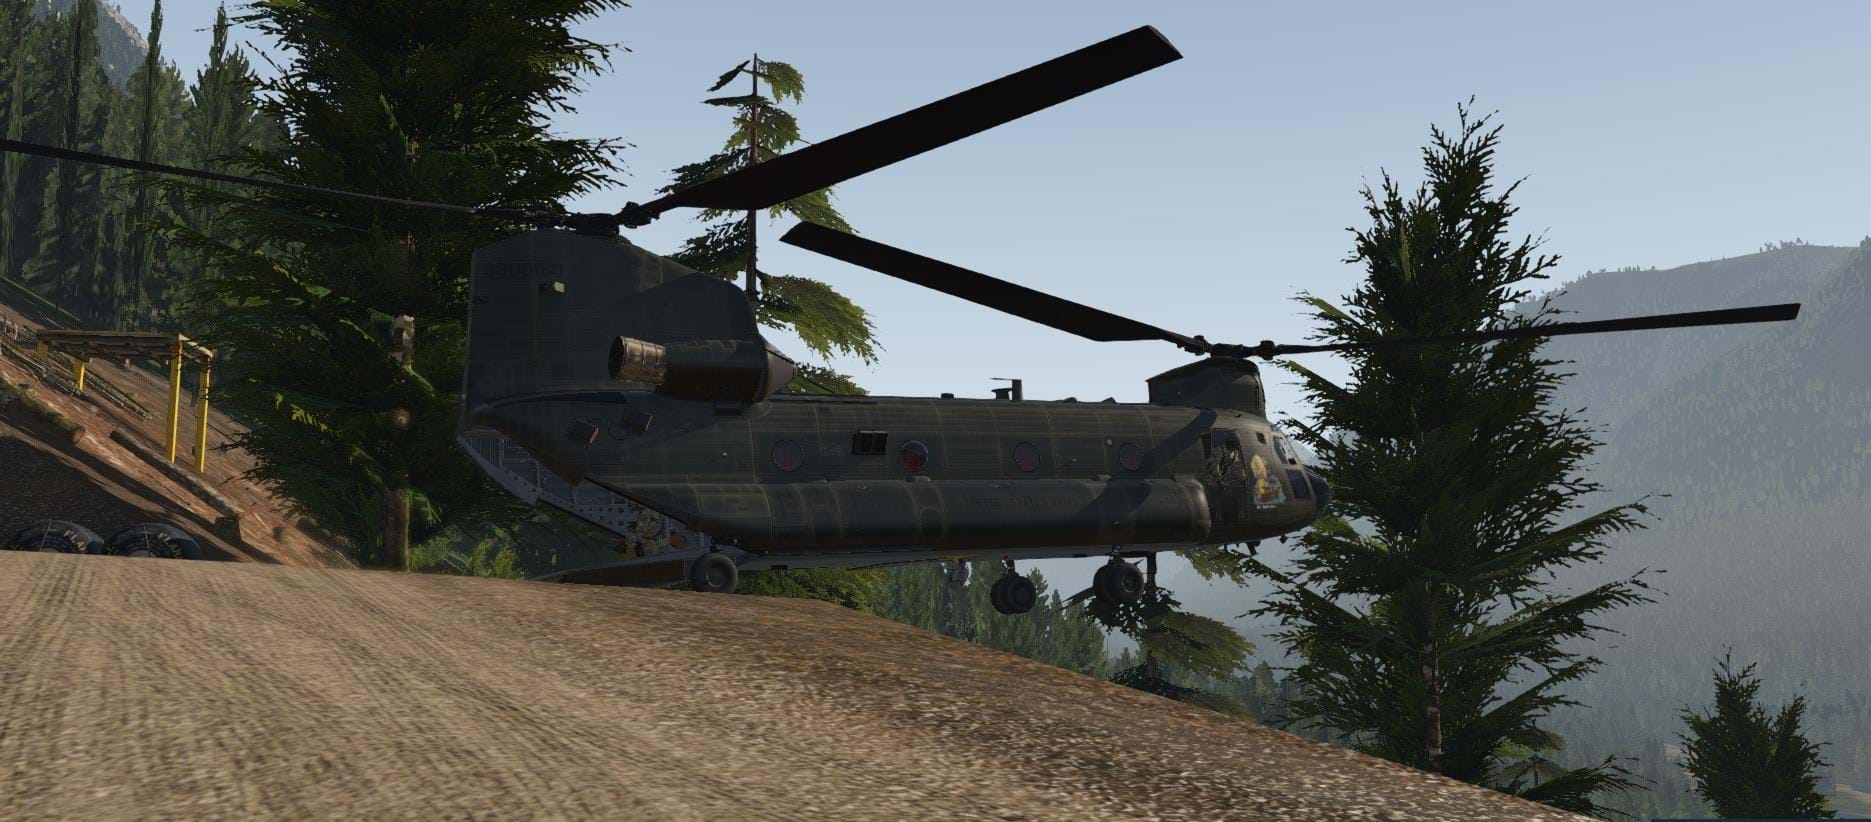 I'm happy that Arma has made it's way to consoles with Reforger